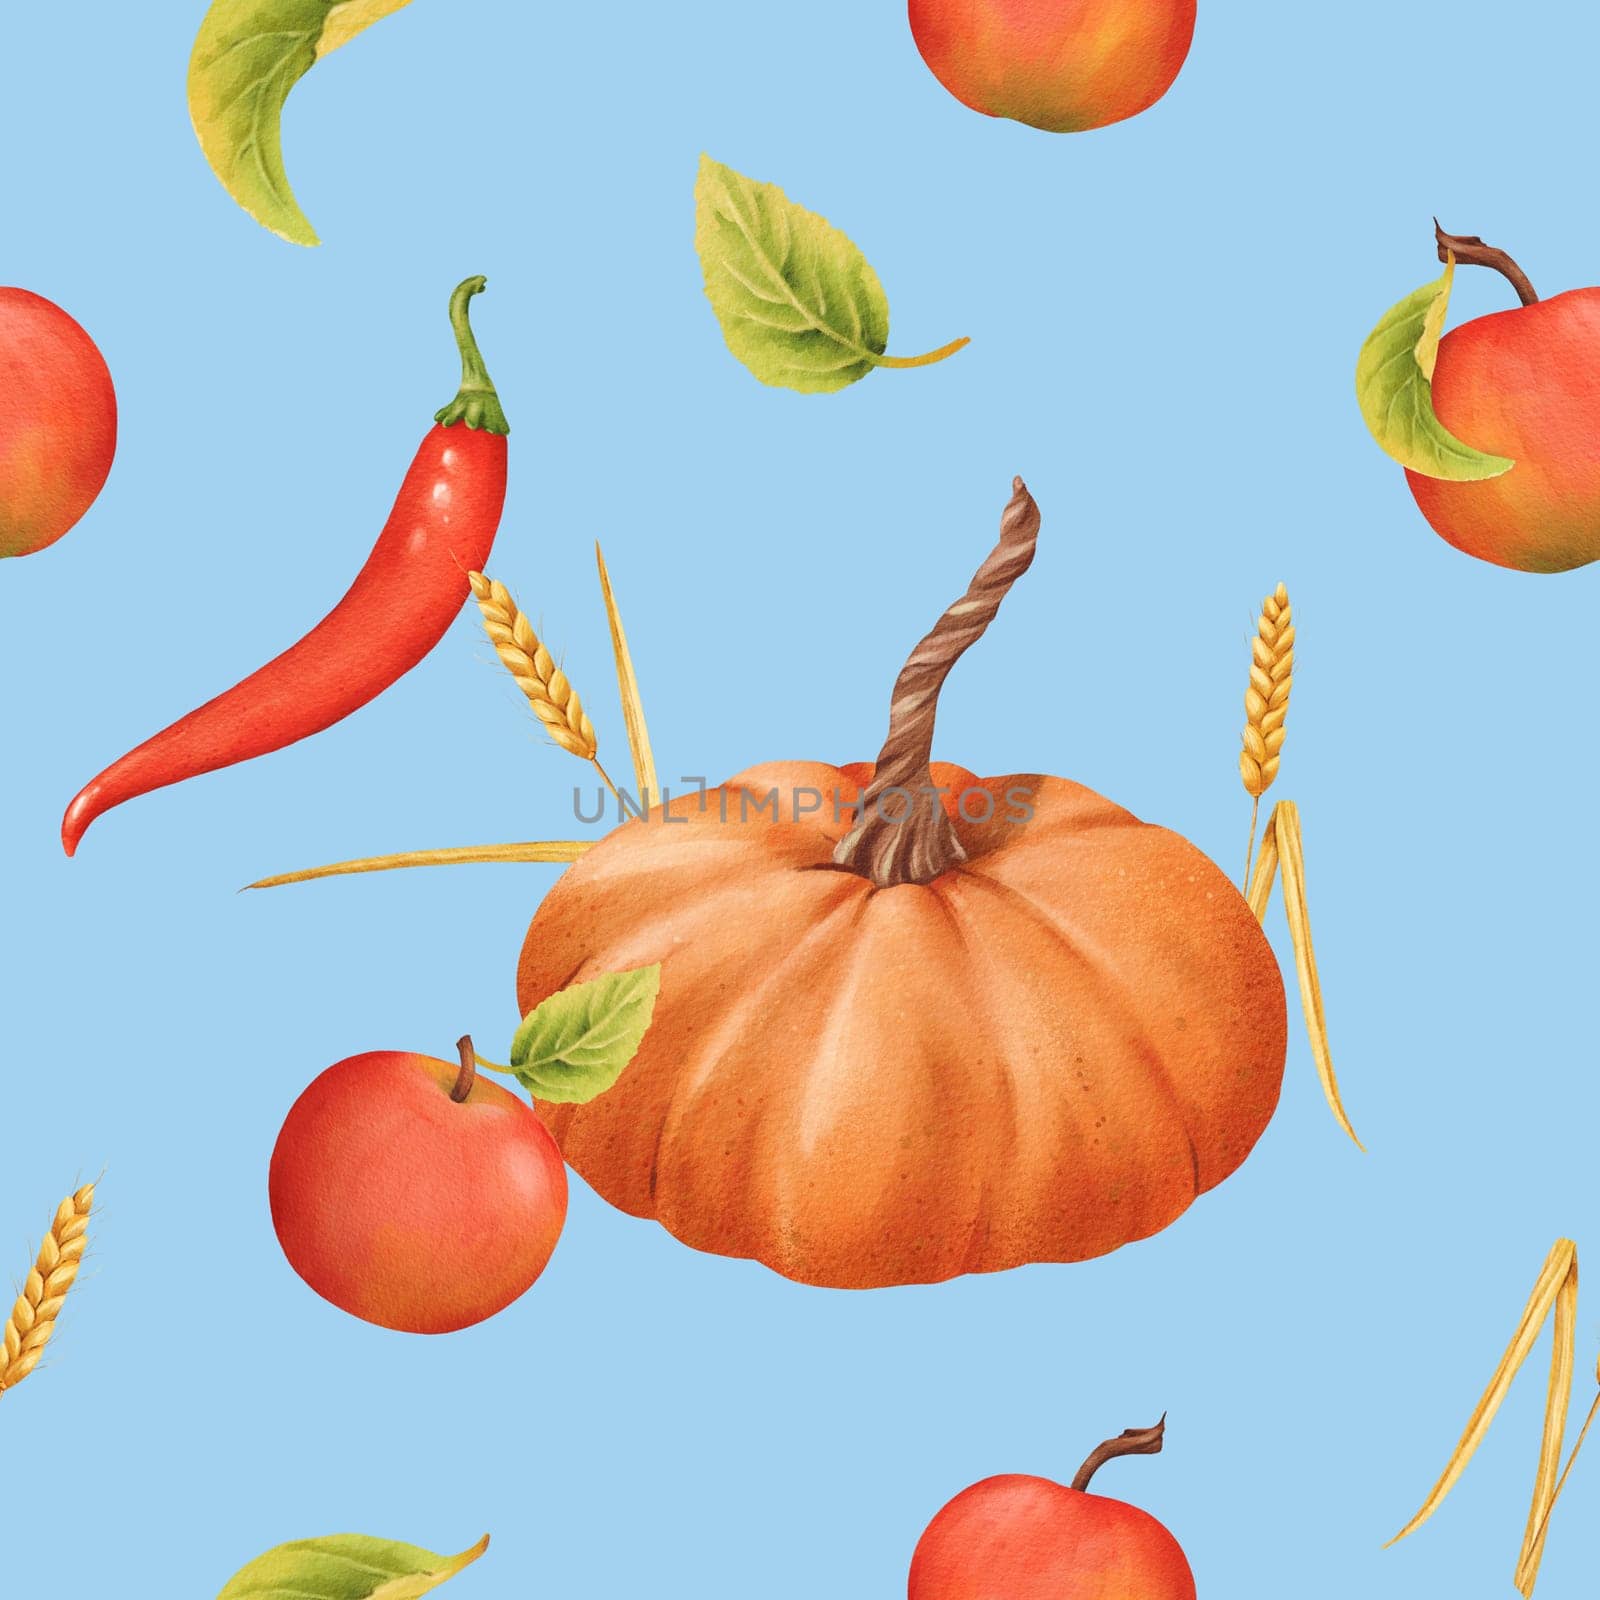 Seamless pattern of Pumpkins, apples, leaves, chili and spikelets. Watercolor illustration. Autumn harvest. Delicious ripe vegetable. Vegetarian raw food. For posters, websites, notebooks, textbooks.